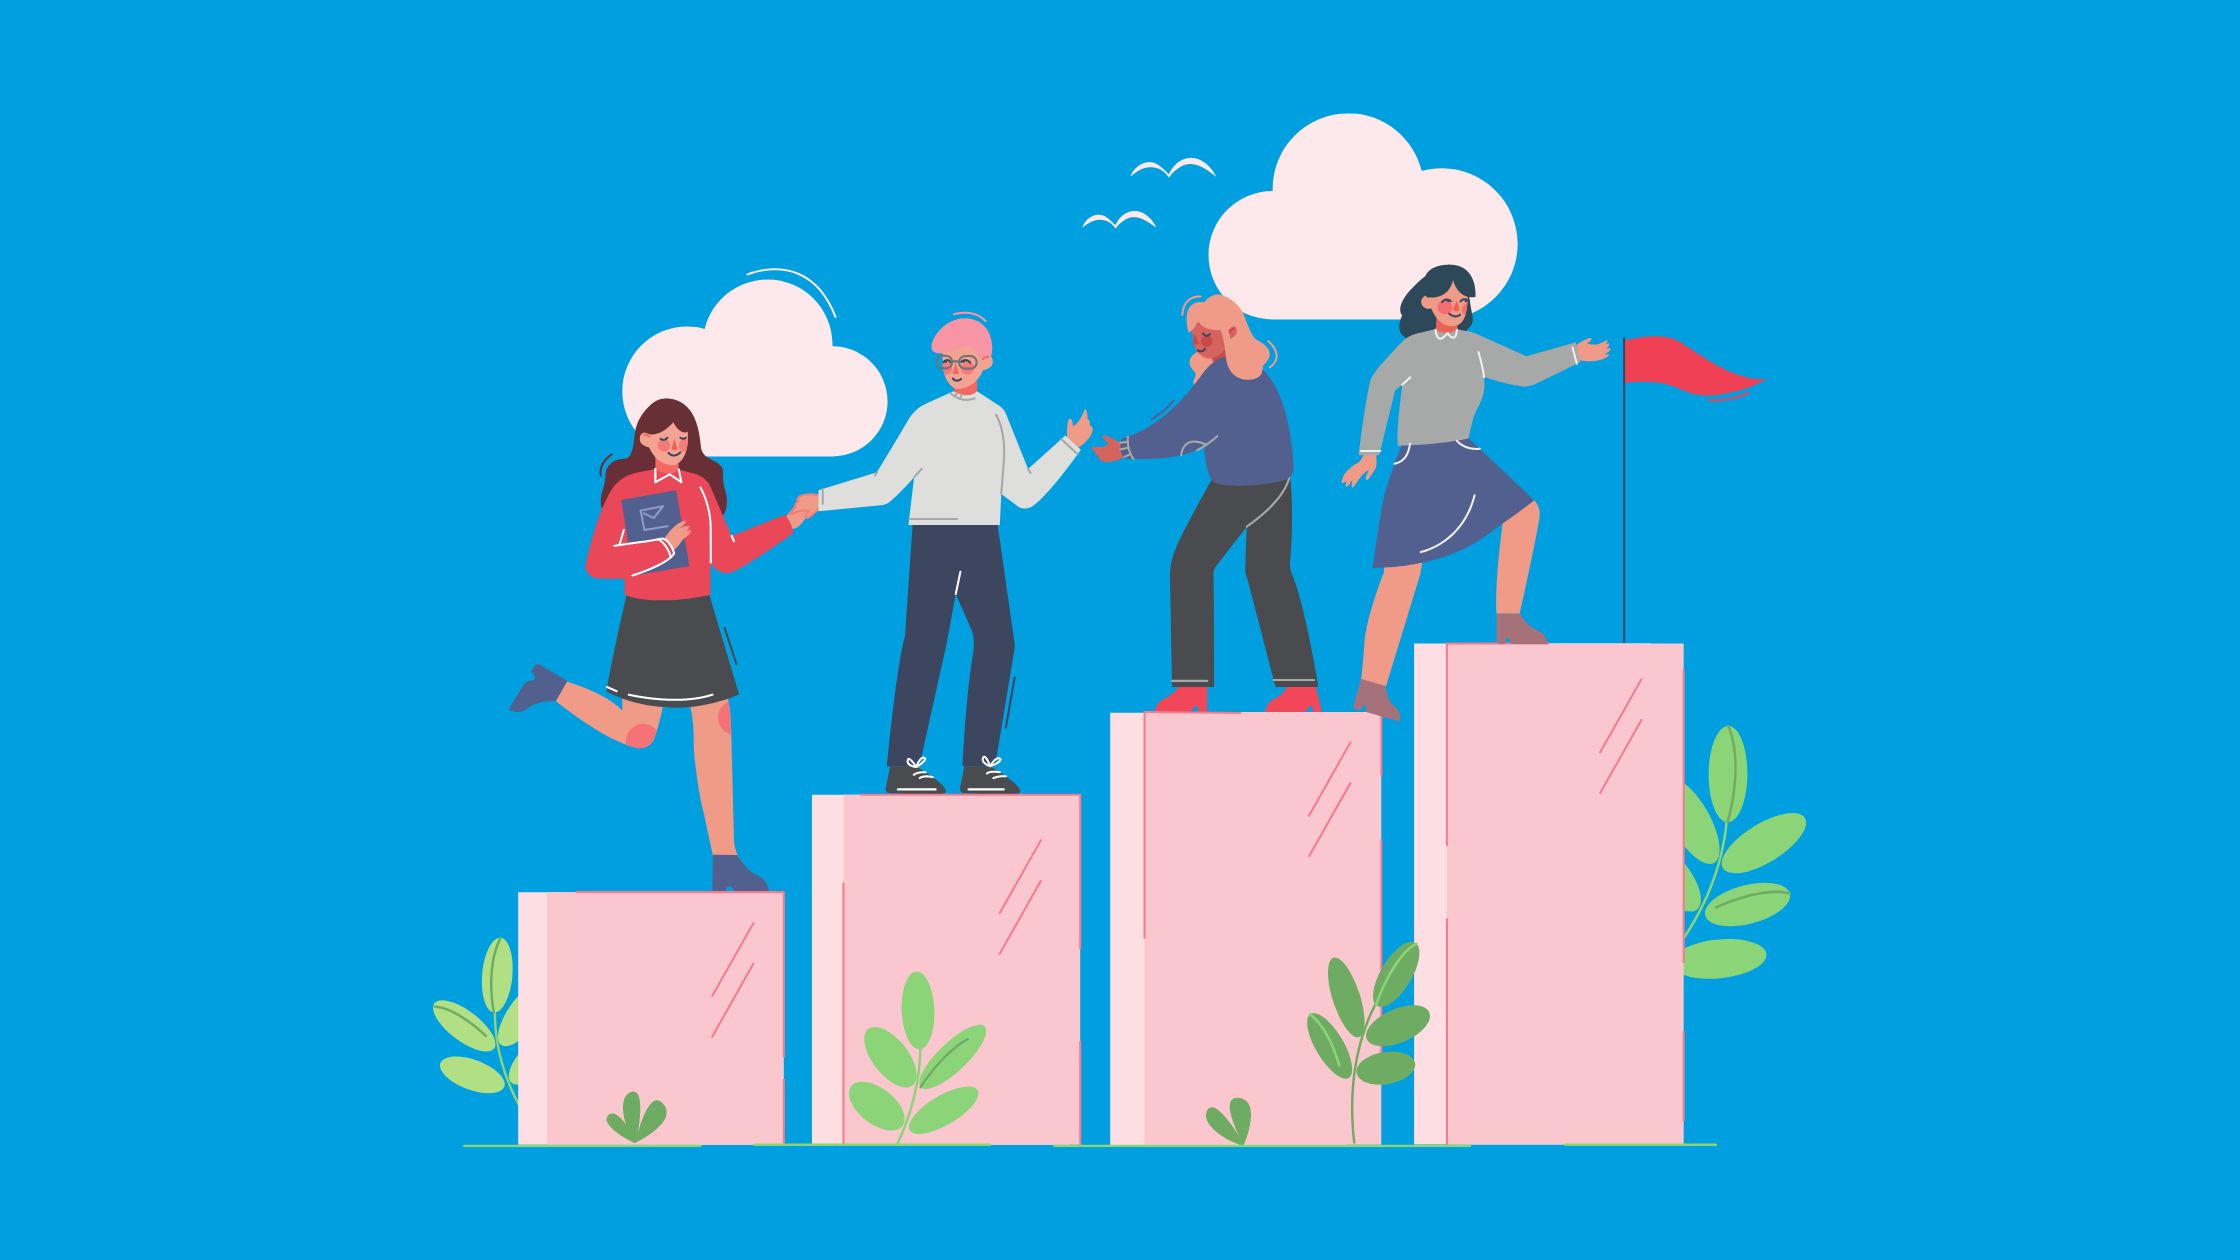 This image features four people on different height platforms, each helping one another get to the top. This image represents the creator corner blog for pro bono video work.